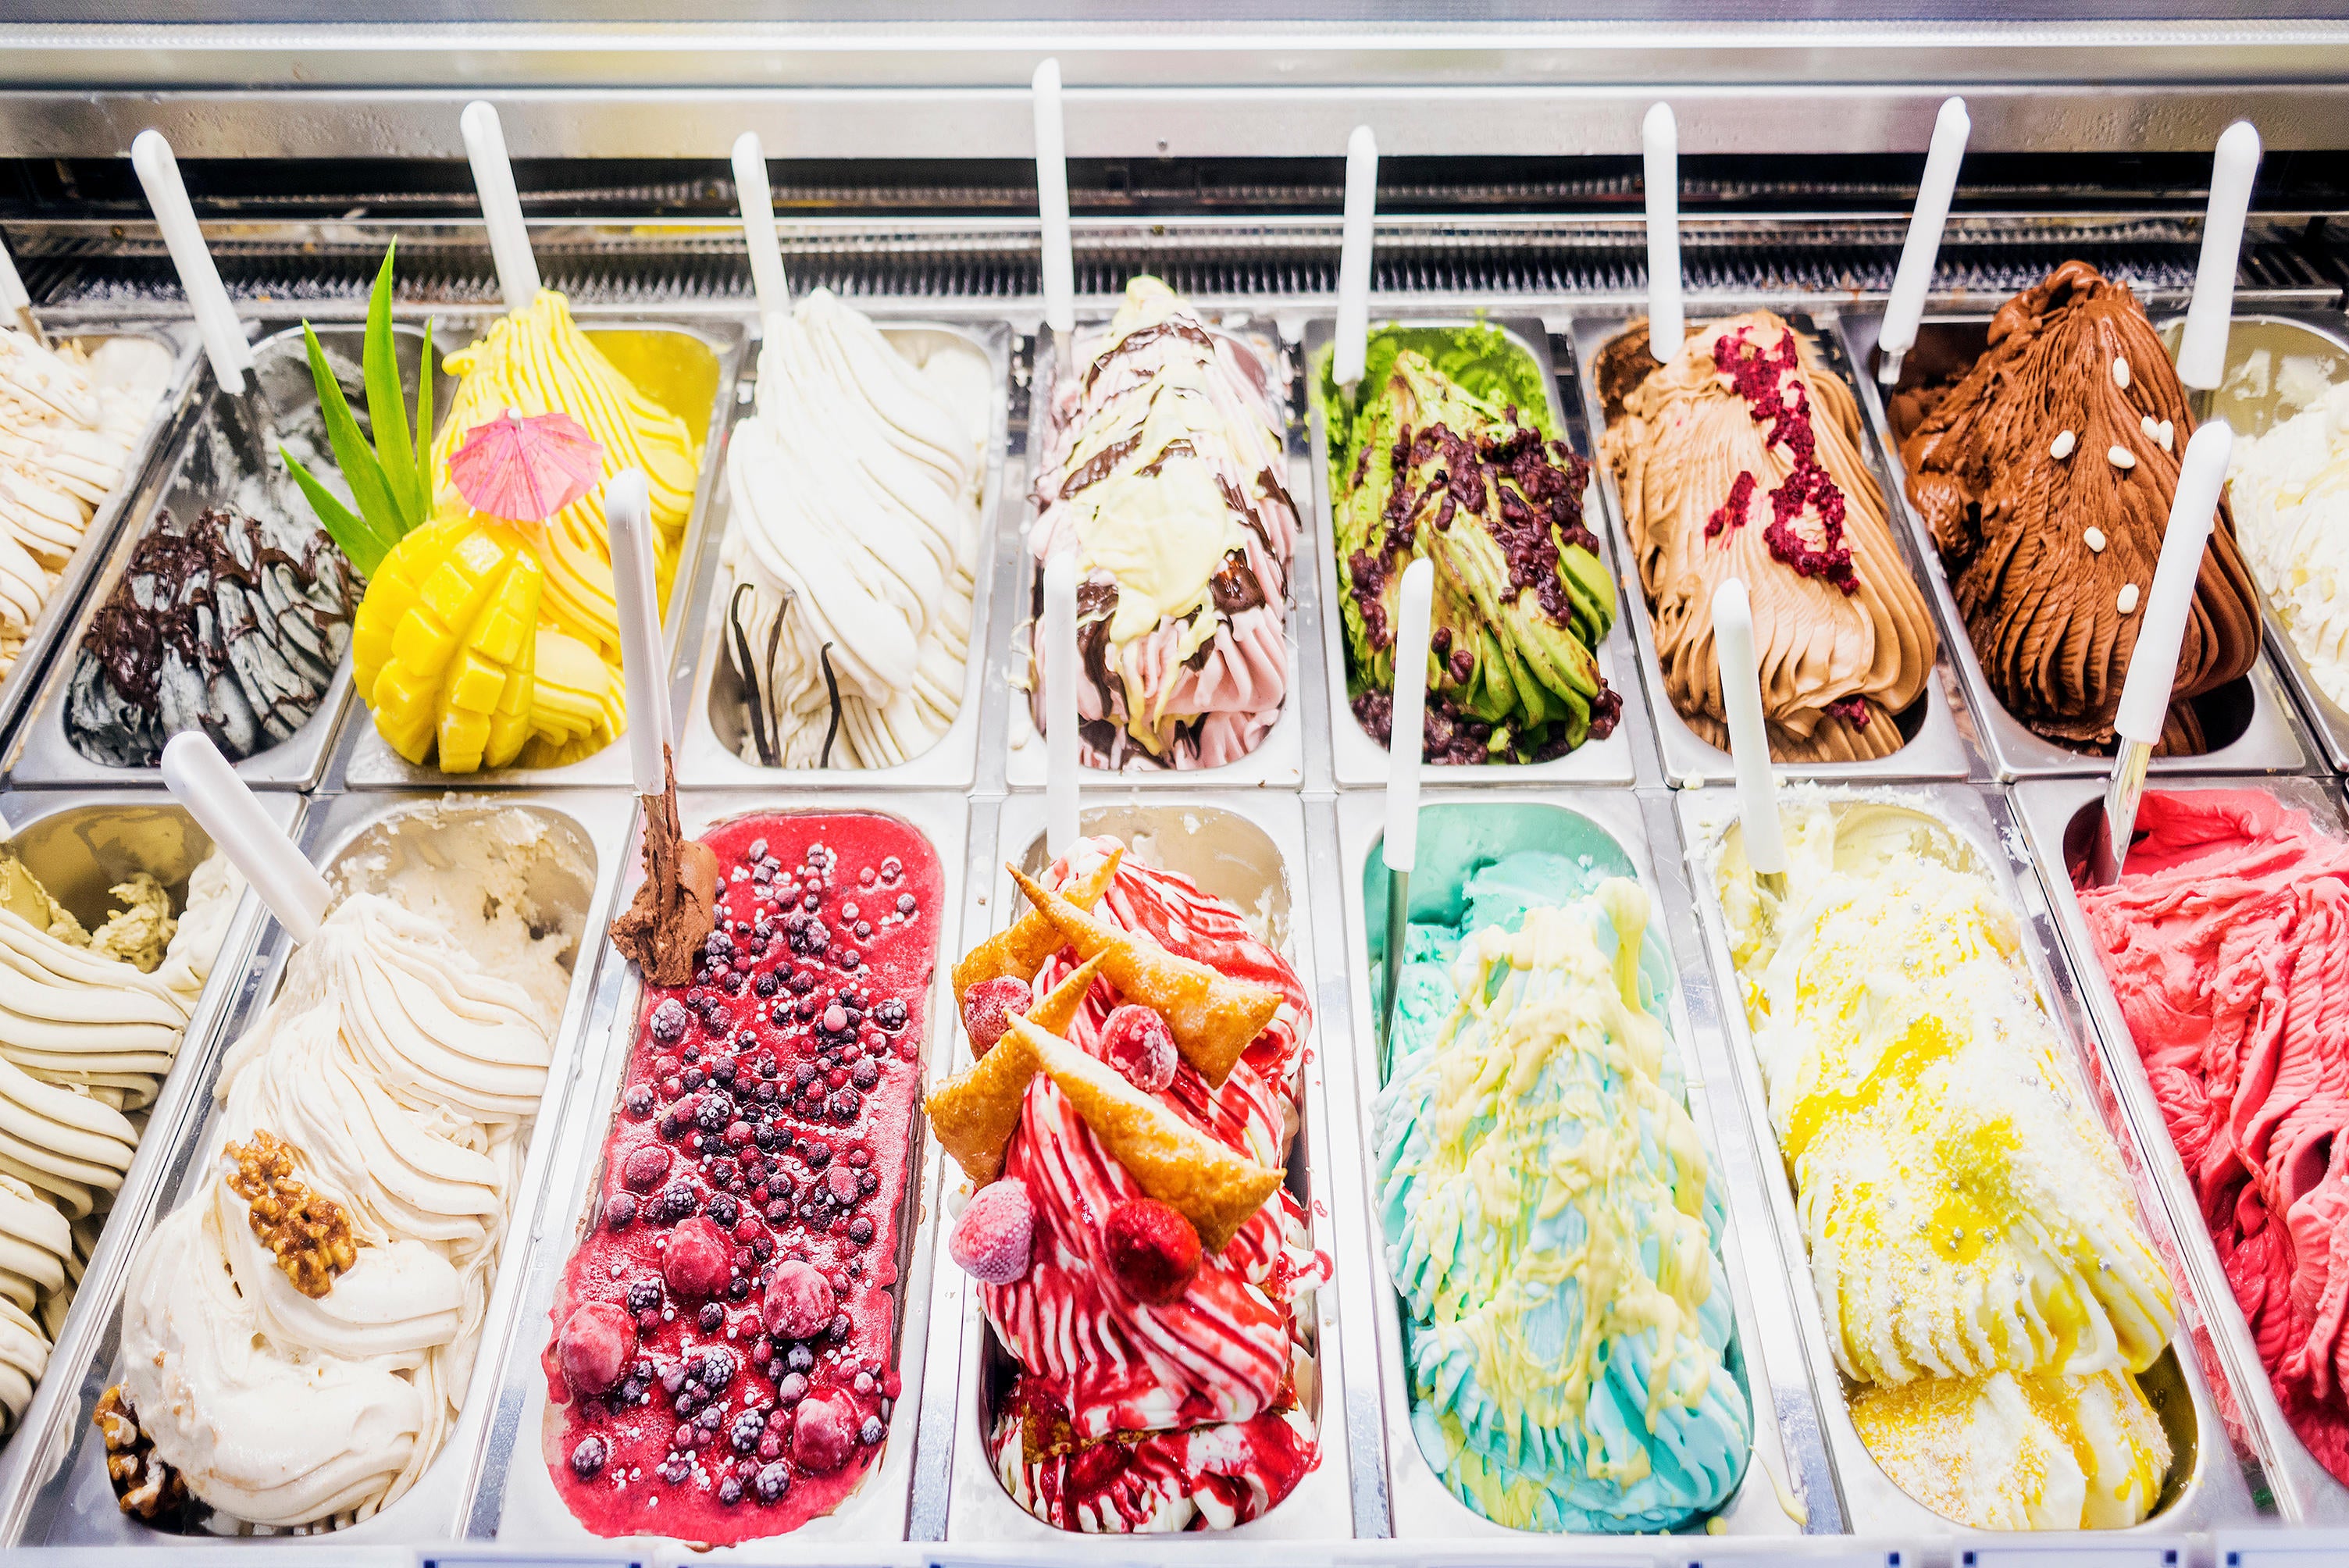 Italian gelato ice cream will no longer be available for late night revellers